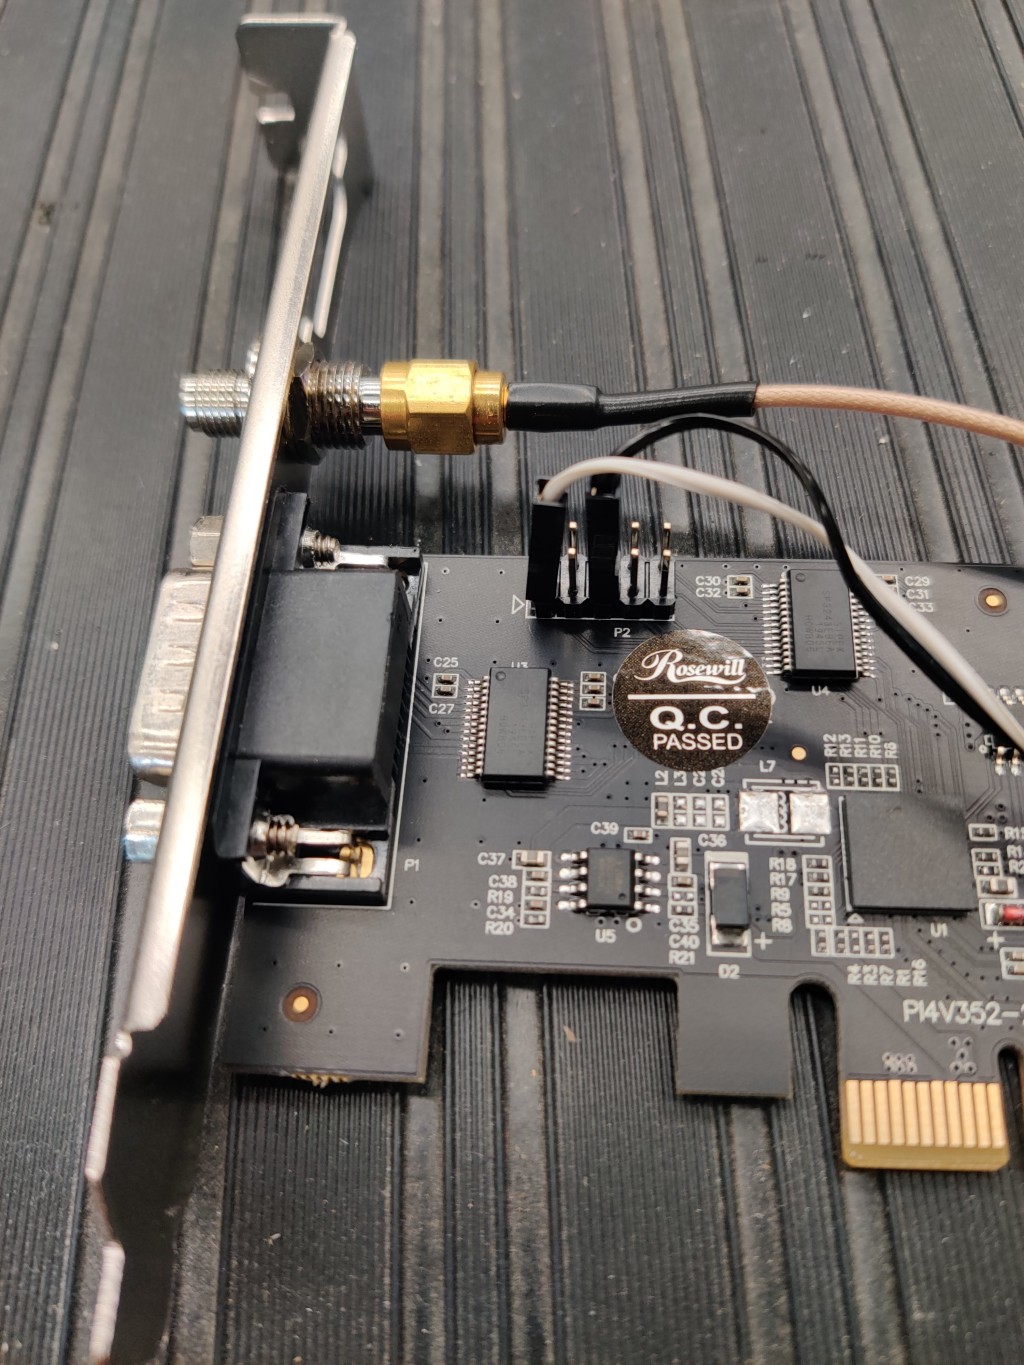 Modify one SMA coaxial cable to connect to the DCD and GND pins of the pcie header